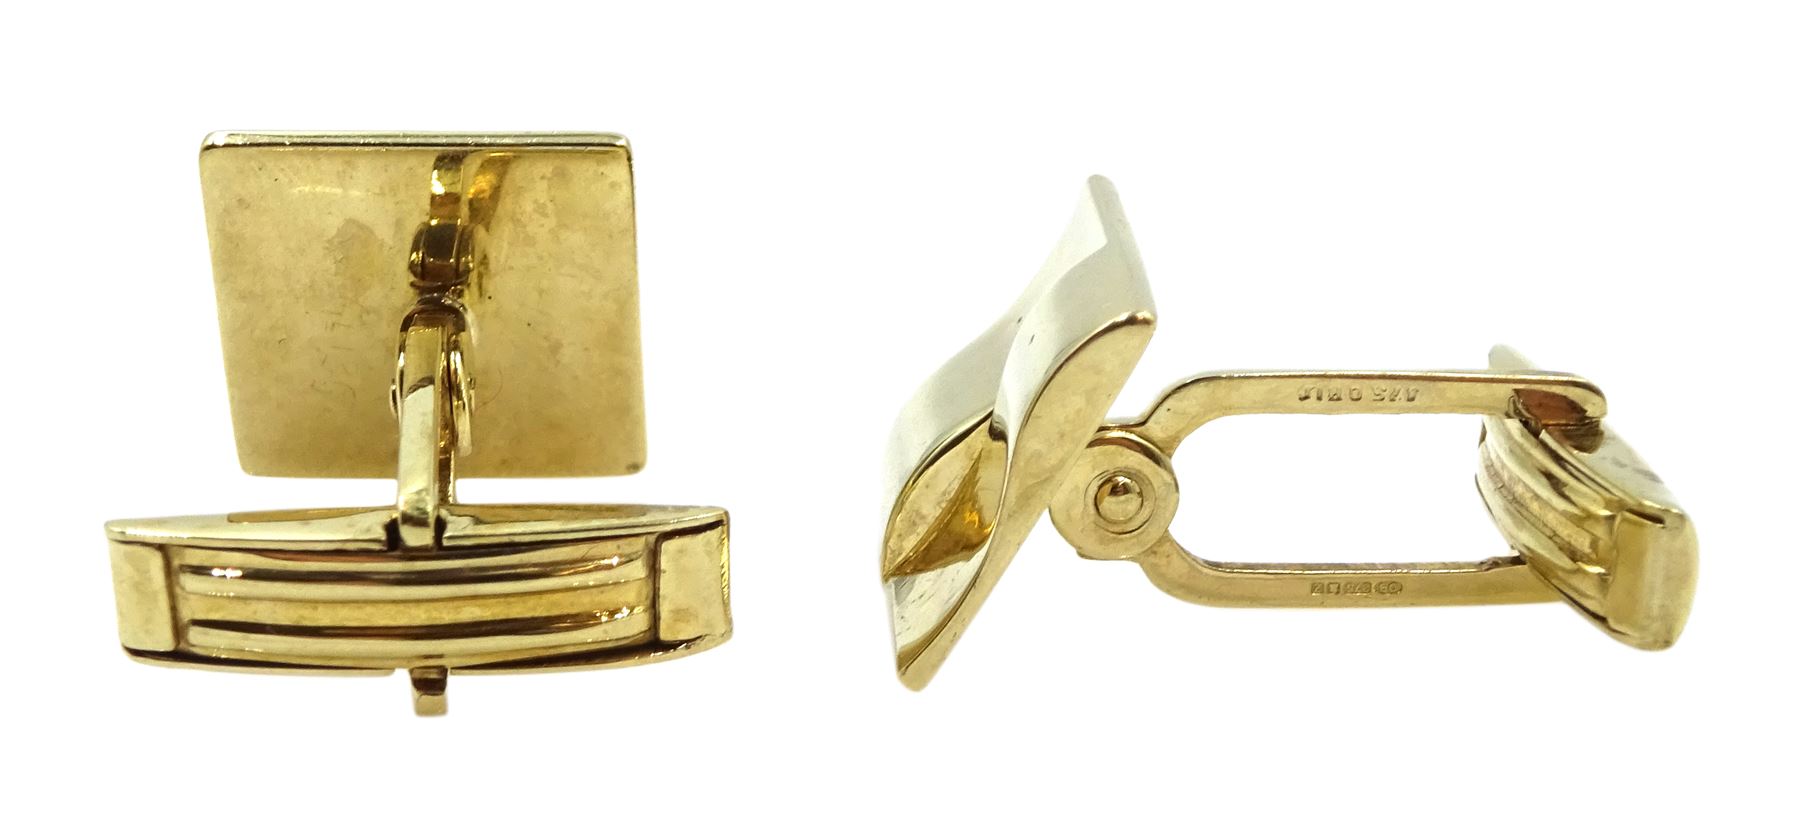 Pair of 9ct gold square cufflinks - Image 2 of 2